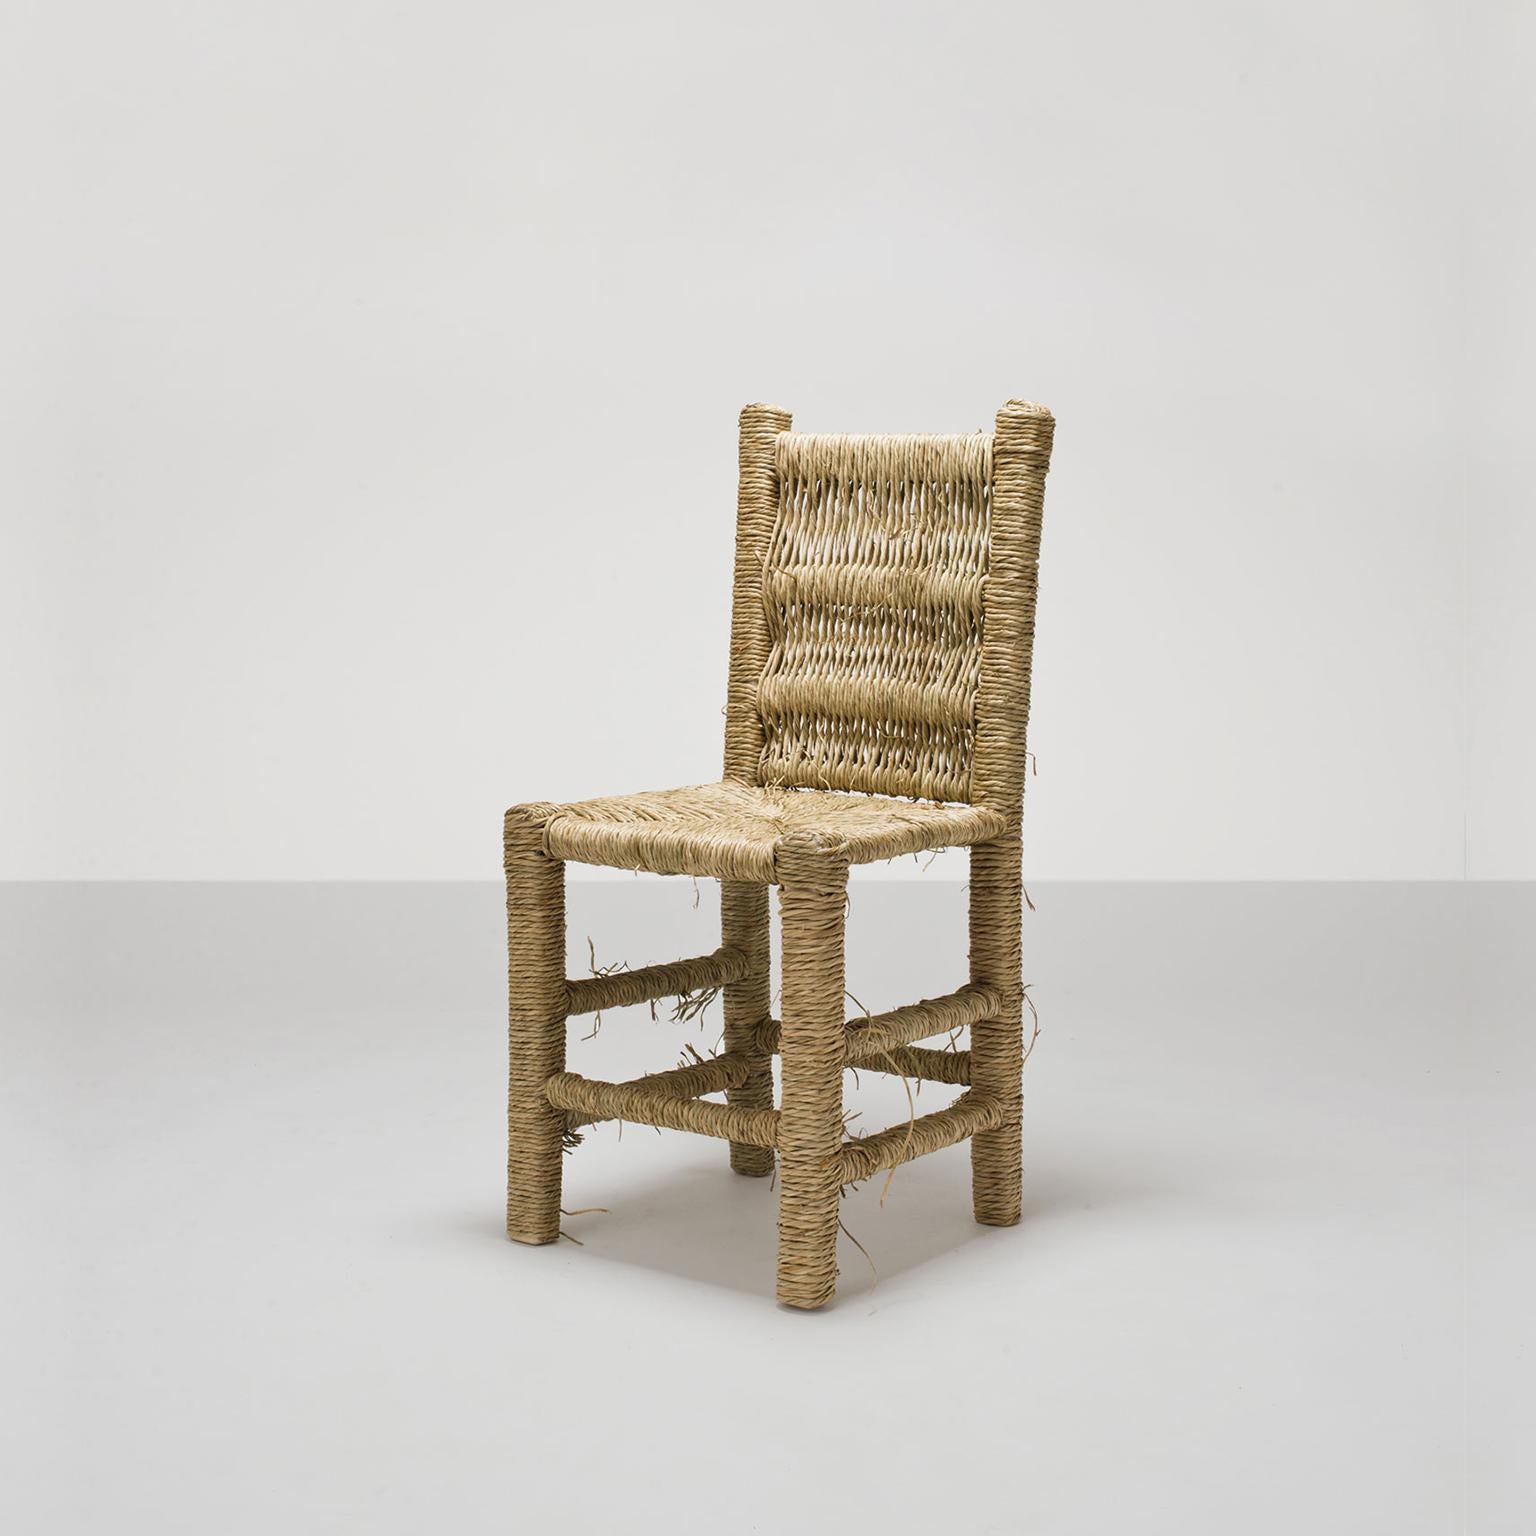 This set of four hand-caned wooden chairs is inspired by Vincent van Gogh’s “Vincent’s Chair with His Pipe”, (1888). Instead of the solitude represented in the original paintings, these Vincent chairs represent the chairs from our memories, a